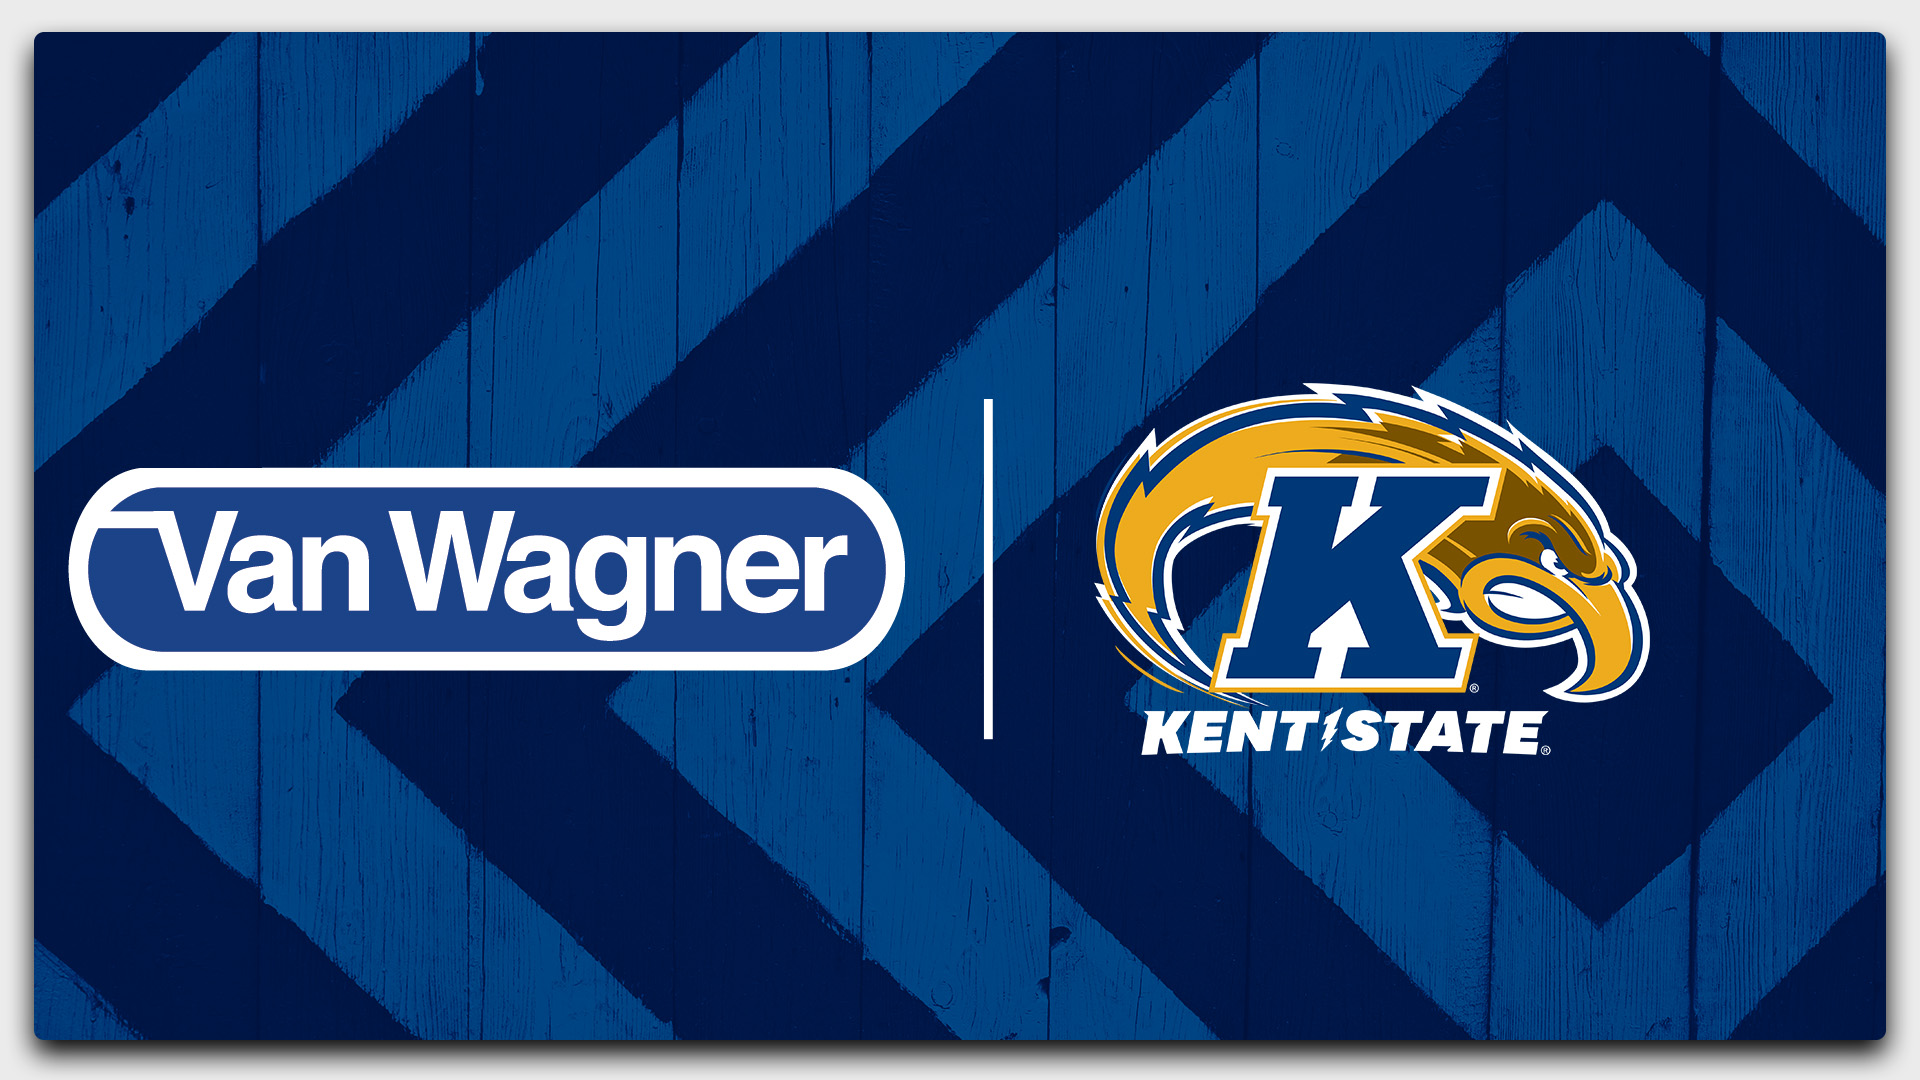 Kent State University Athletics Names Van Wagner as Exclusive Multimedia Rights Partner and Sales Agent featured image